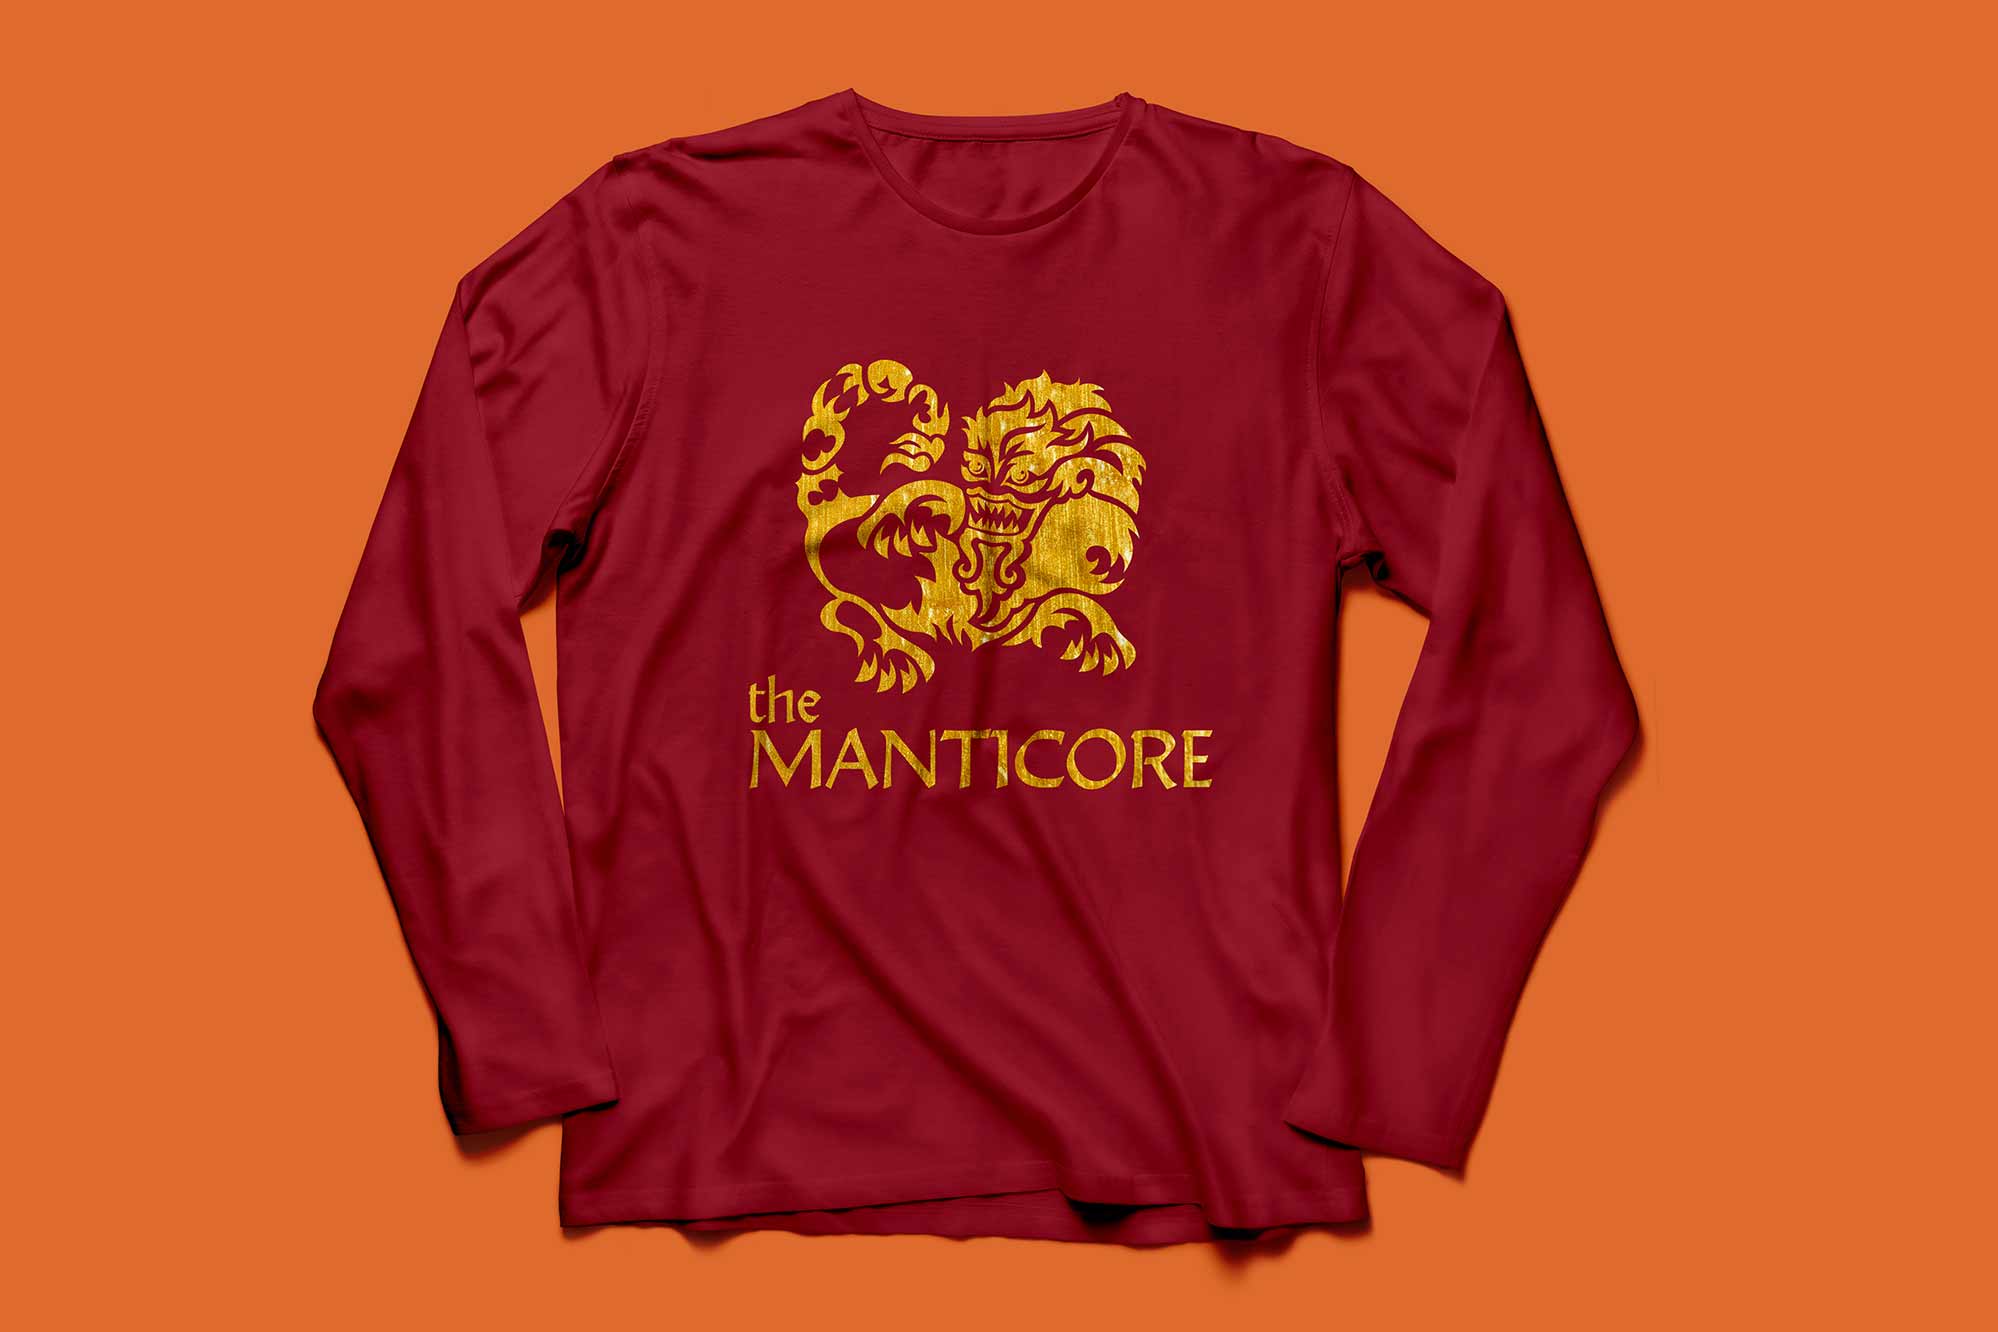 An image of a shirt with the created manticore symbol.